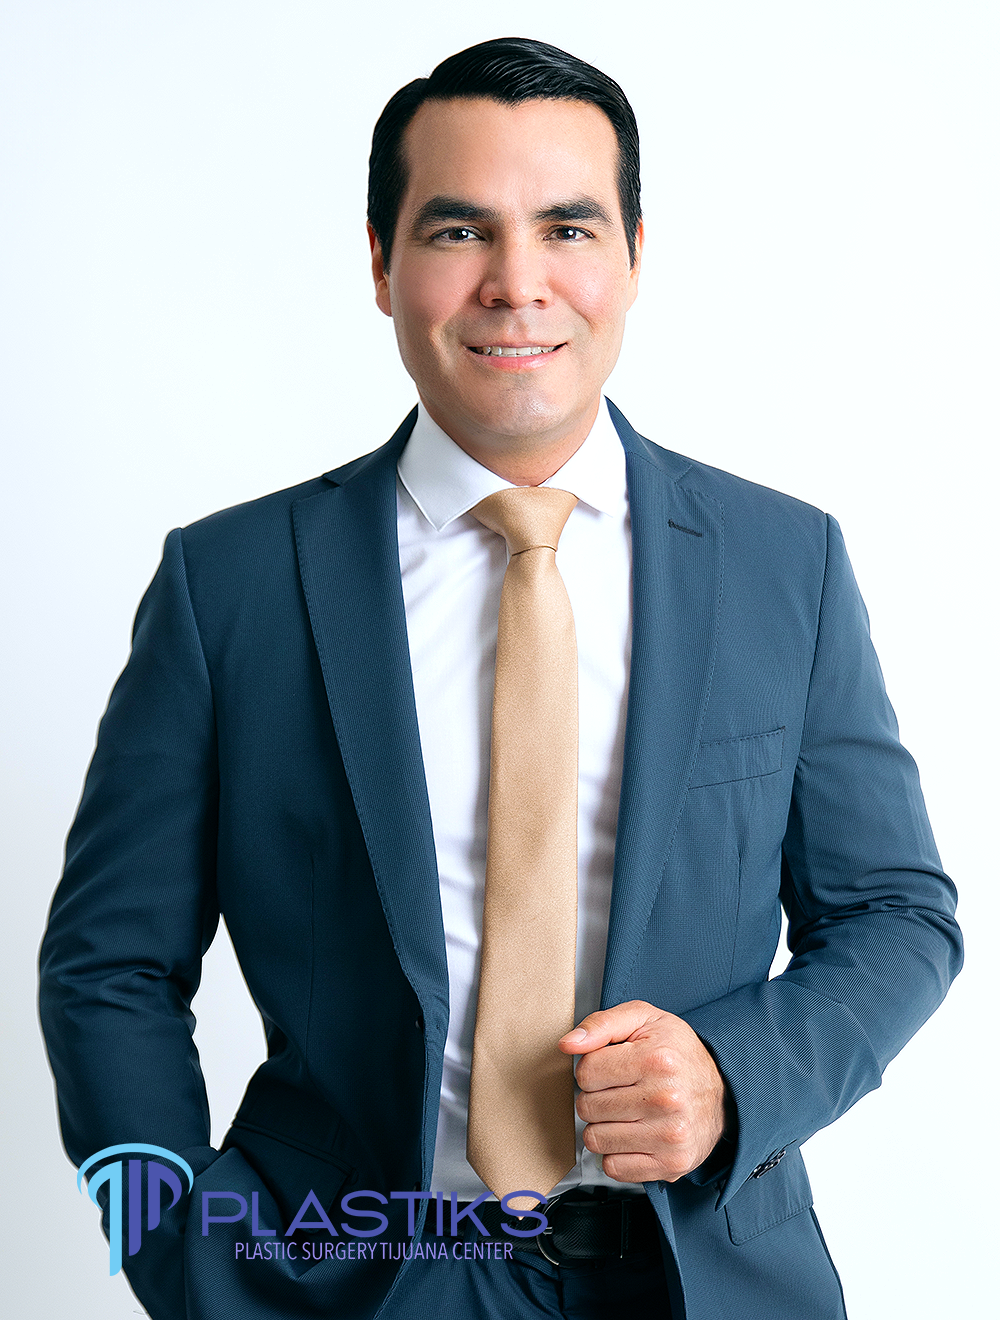 Dr. Rafael Camberos Solis is a fully trained and licensed board-certified plastic surgeon in Tijuana, Mexico.